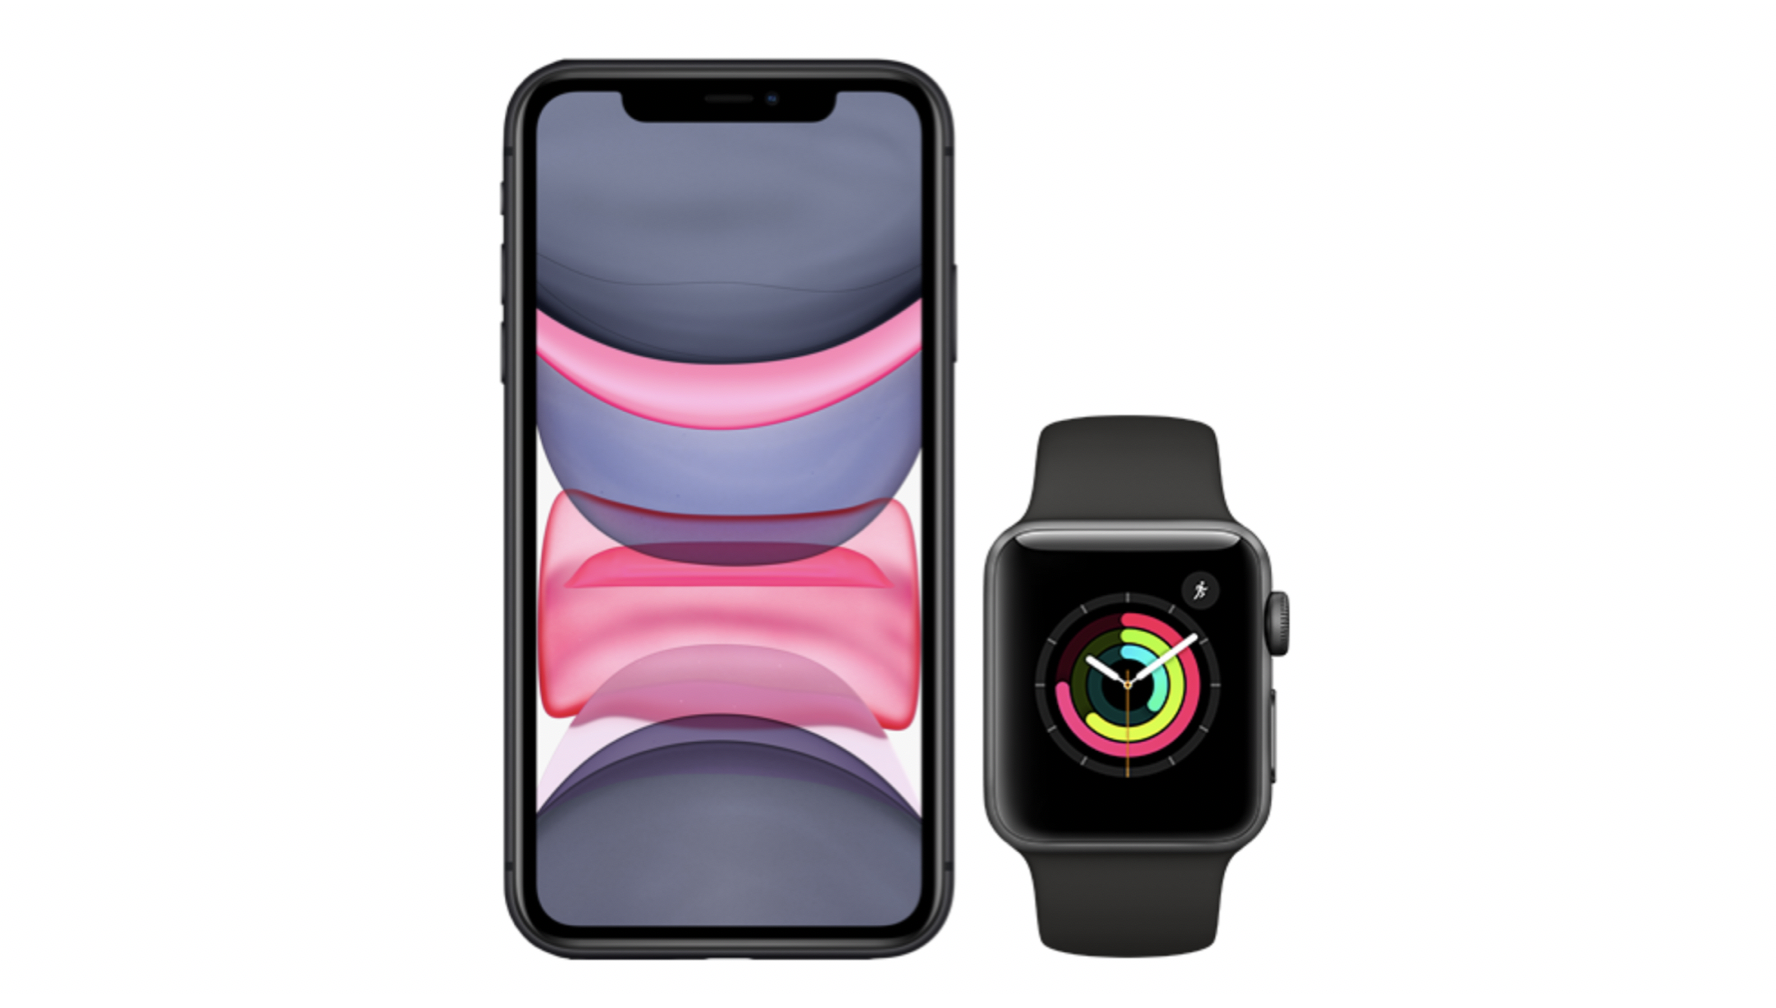 ApplewatchとiPhone11